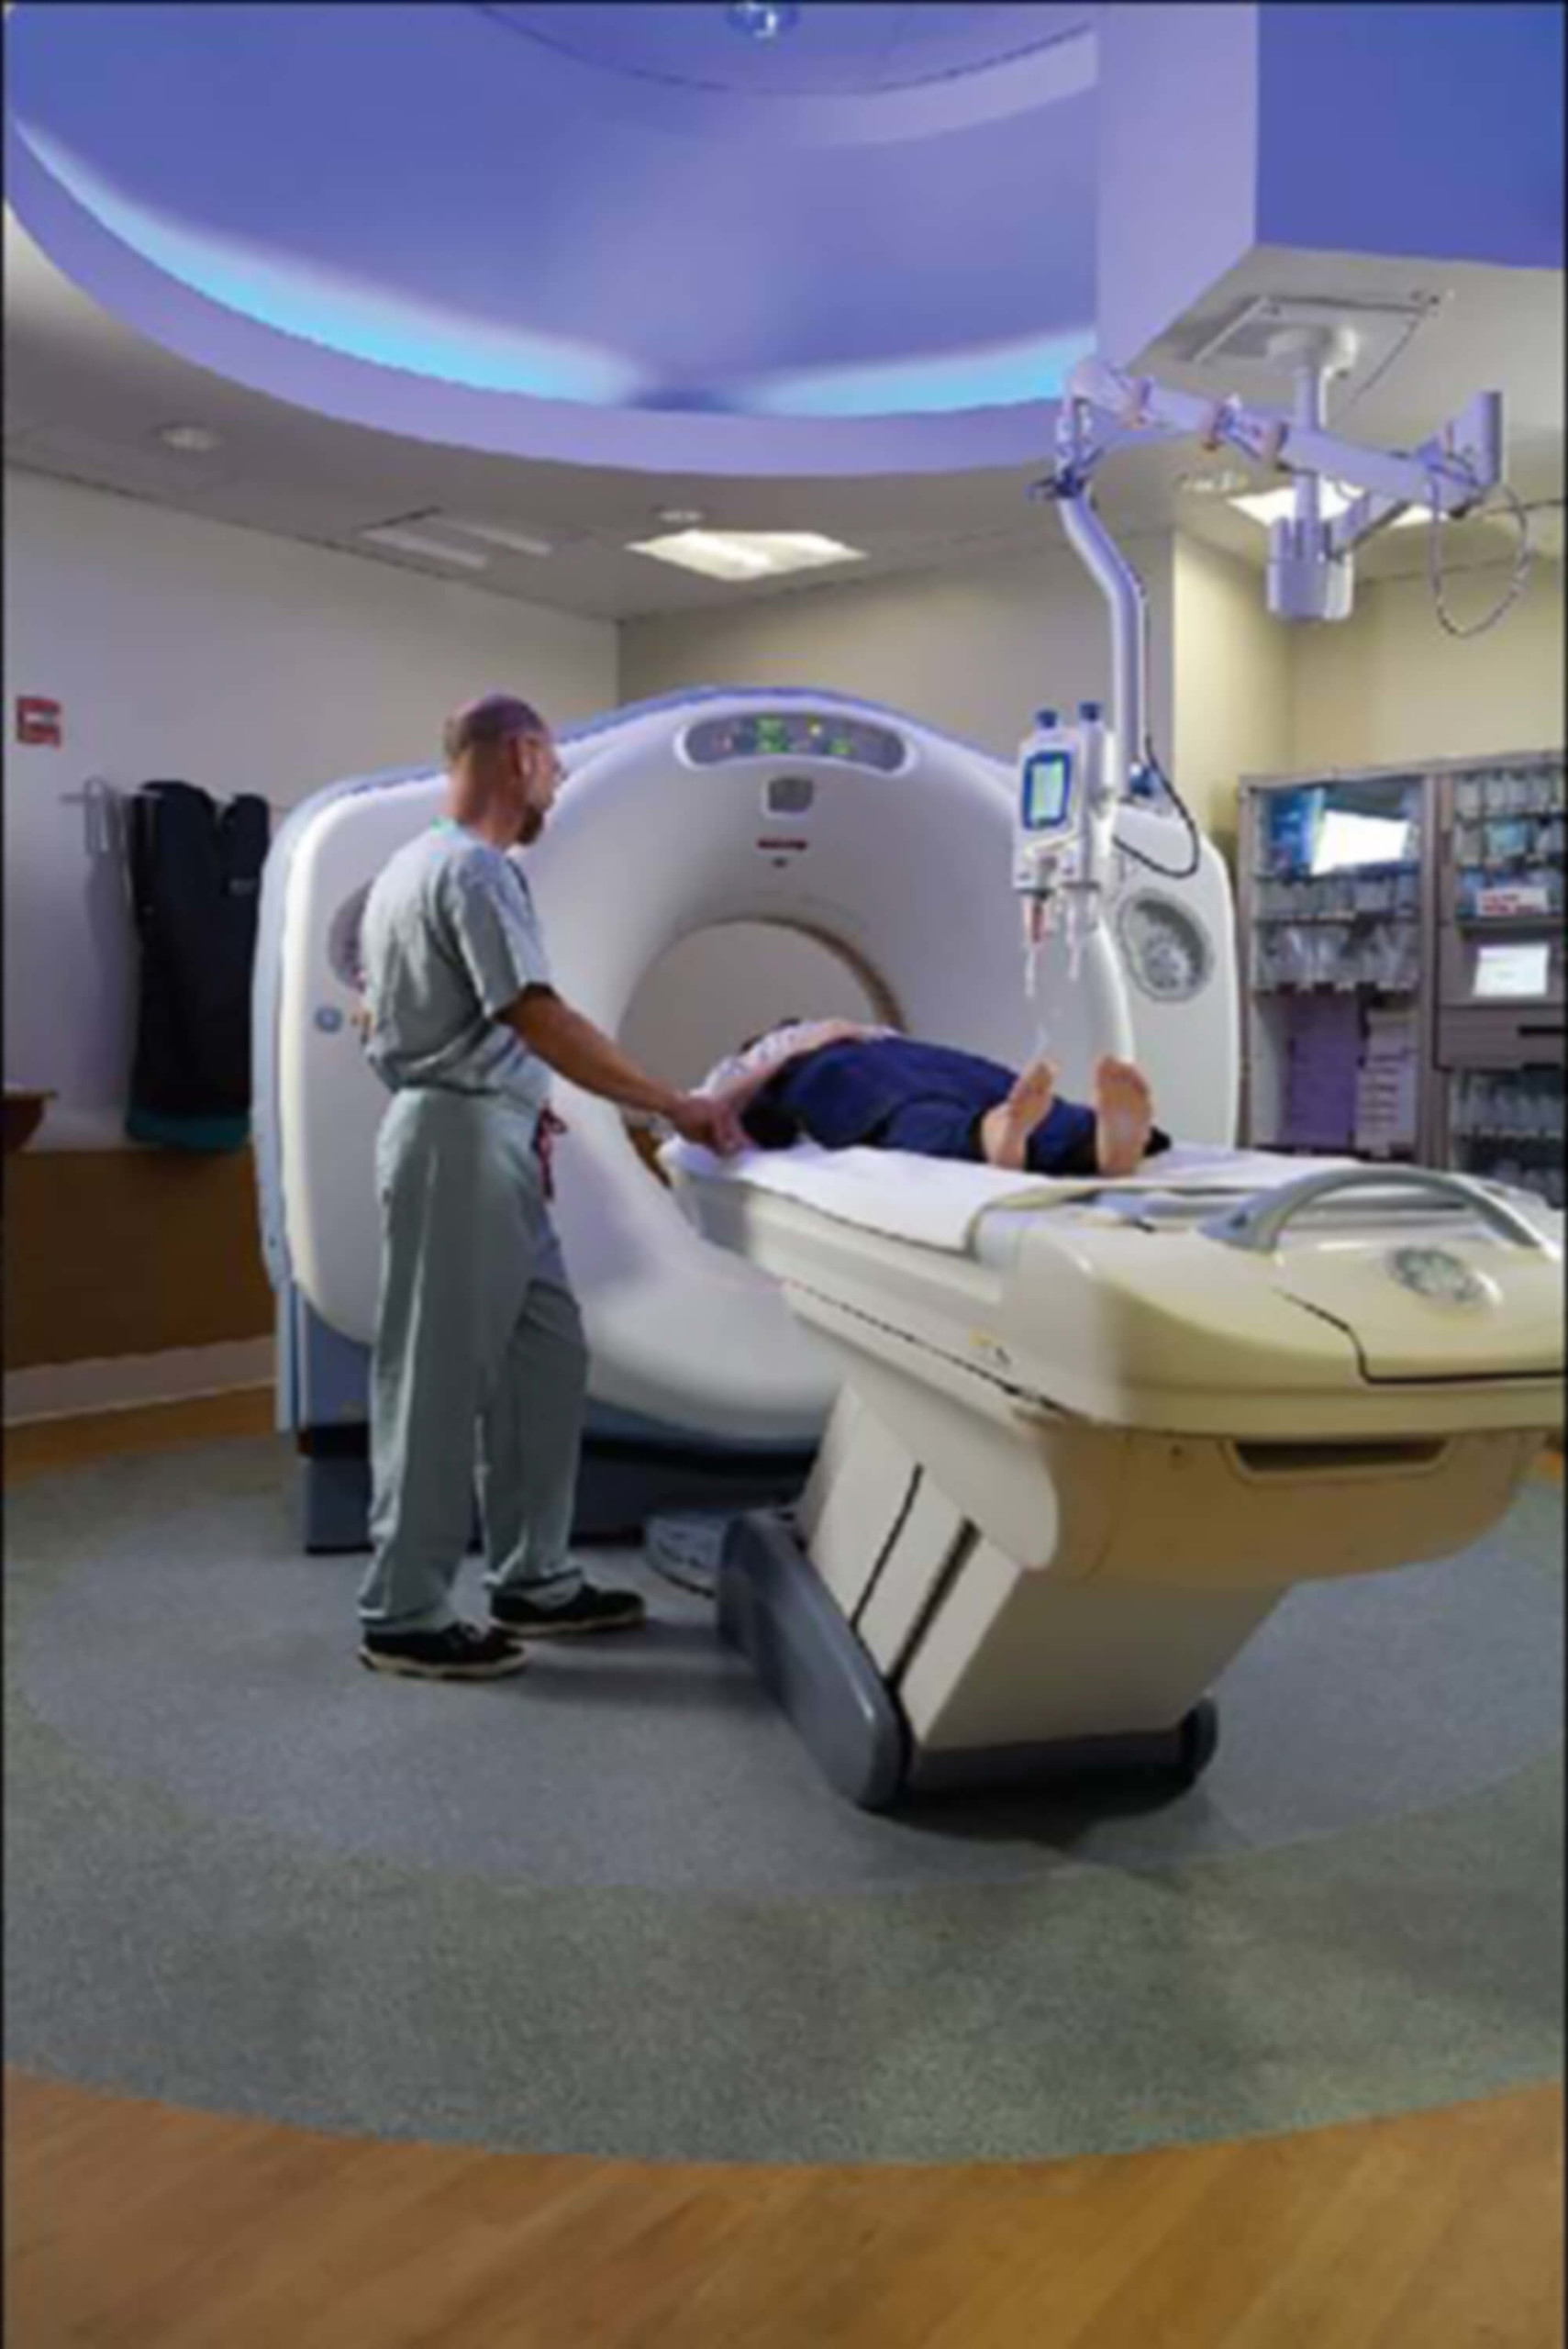 Expansion of the Emergency Department’s Imaging and Diagnostic Capabilities